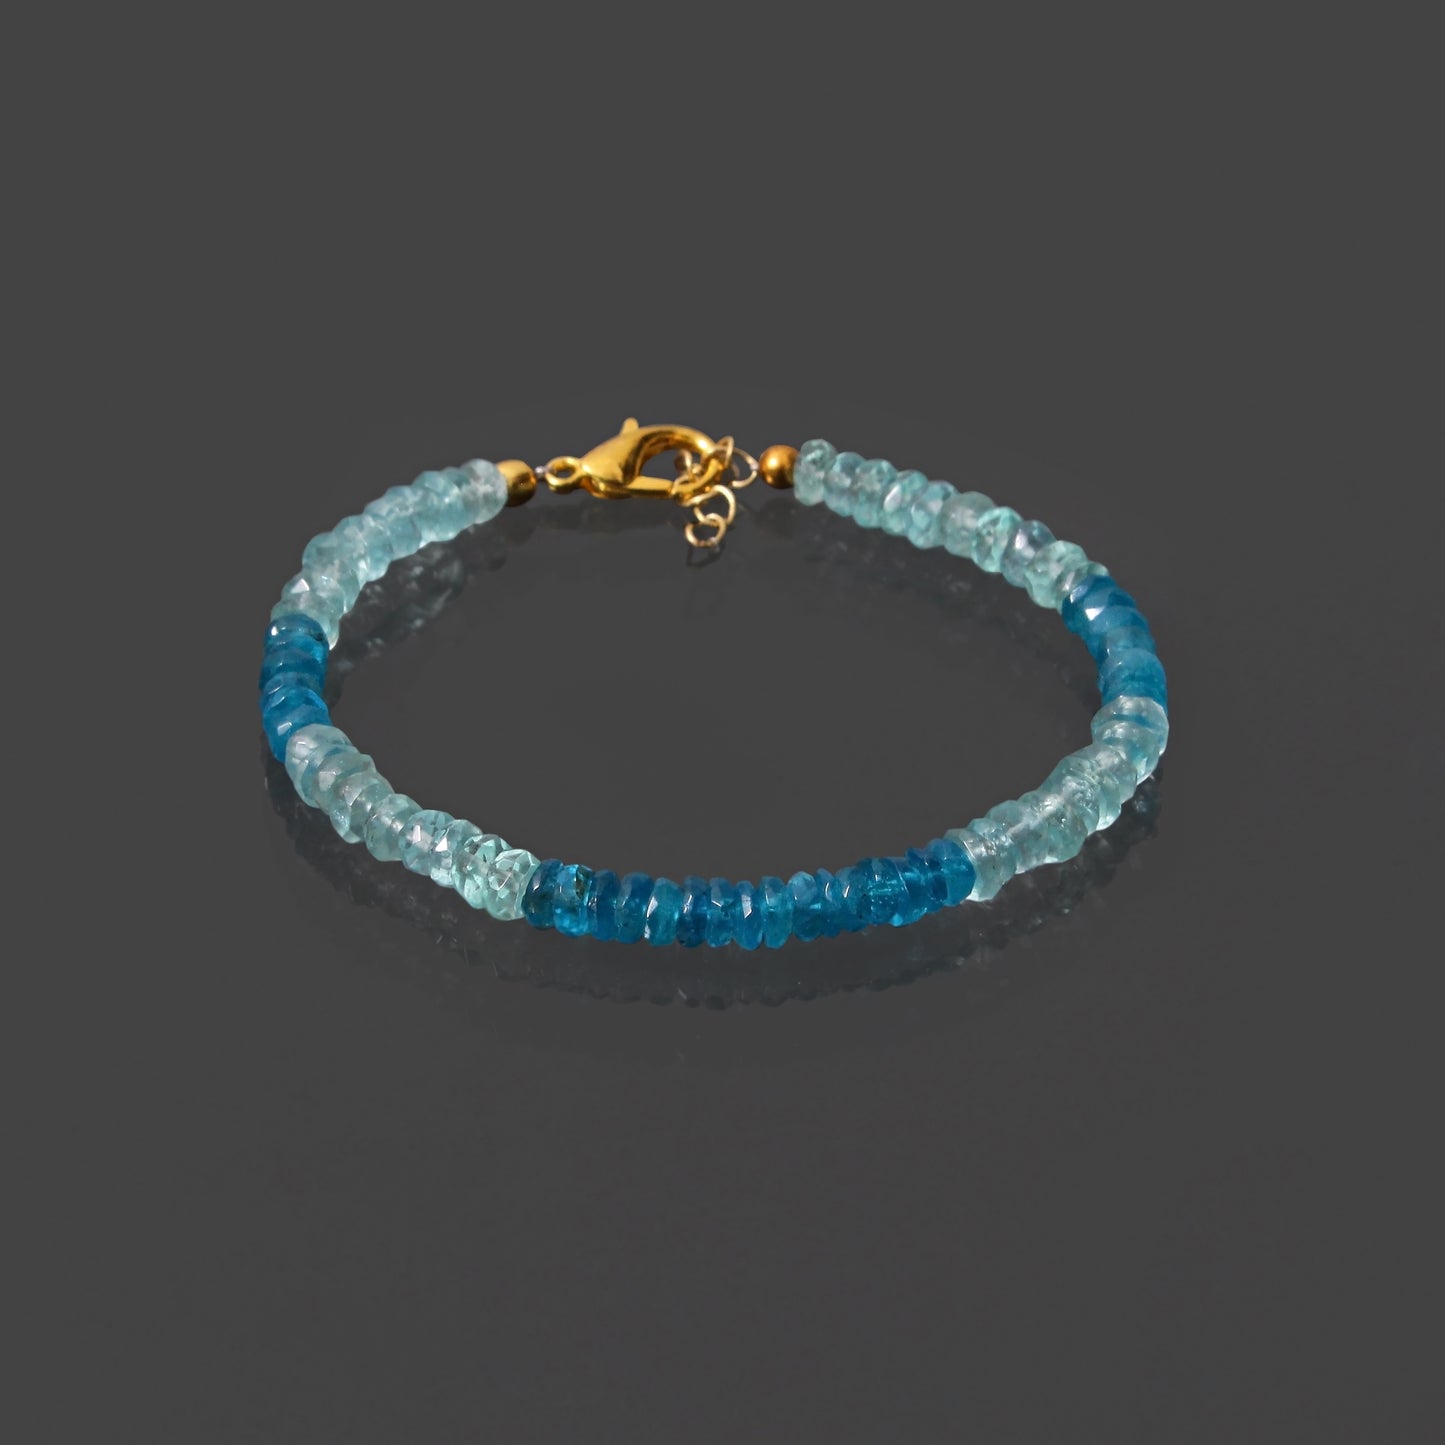 High quality apatite and aquamarine beaded necklace with gold plated lobster lock